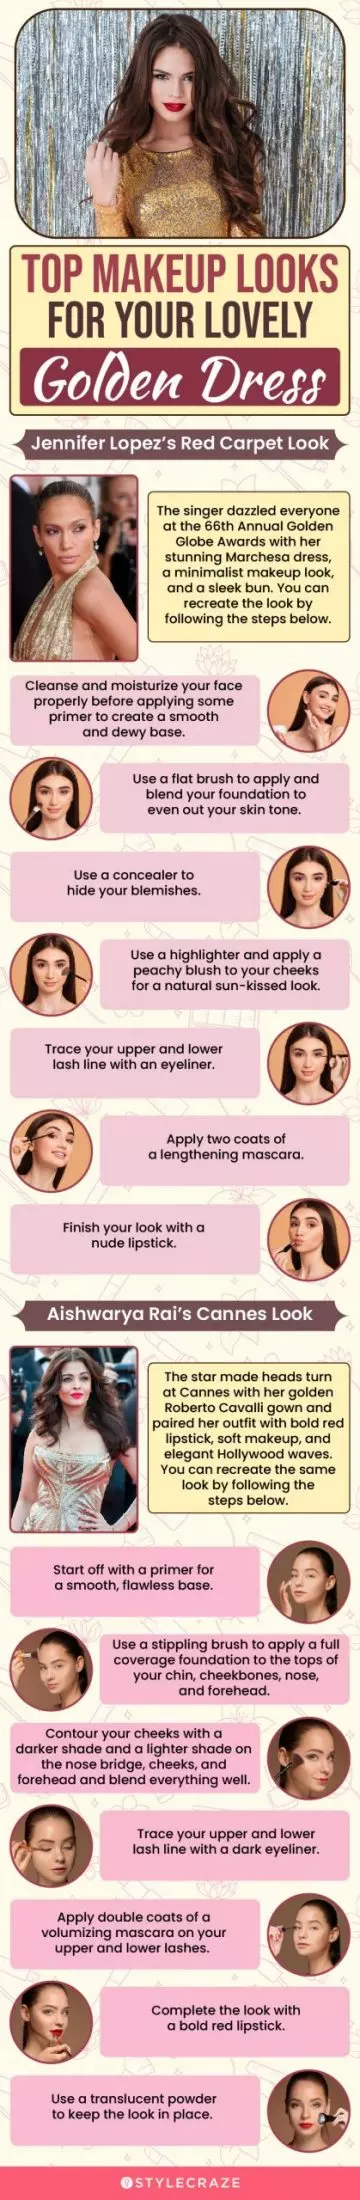 top makeup looks for your lovely golden dress (infographic)